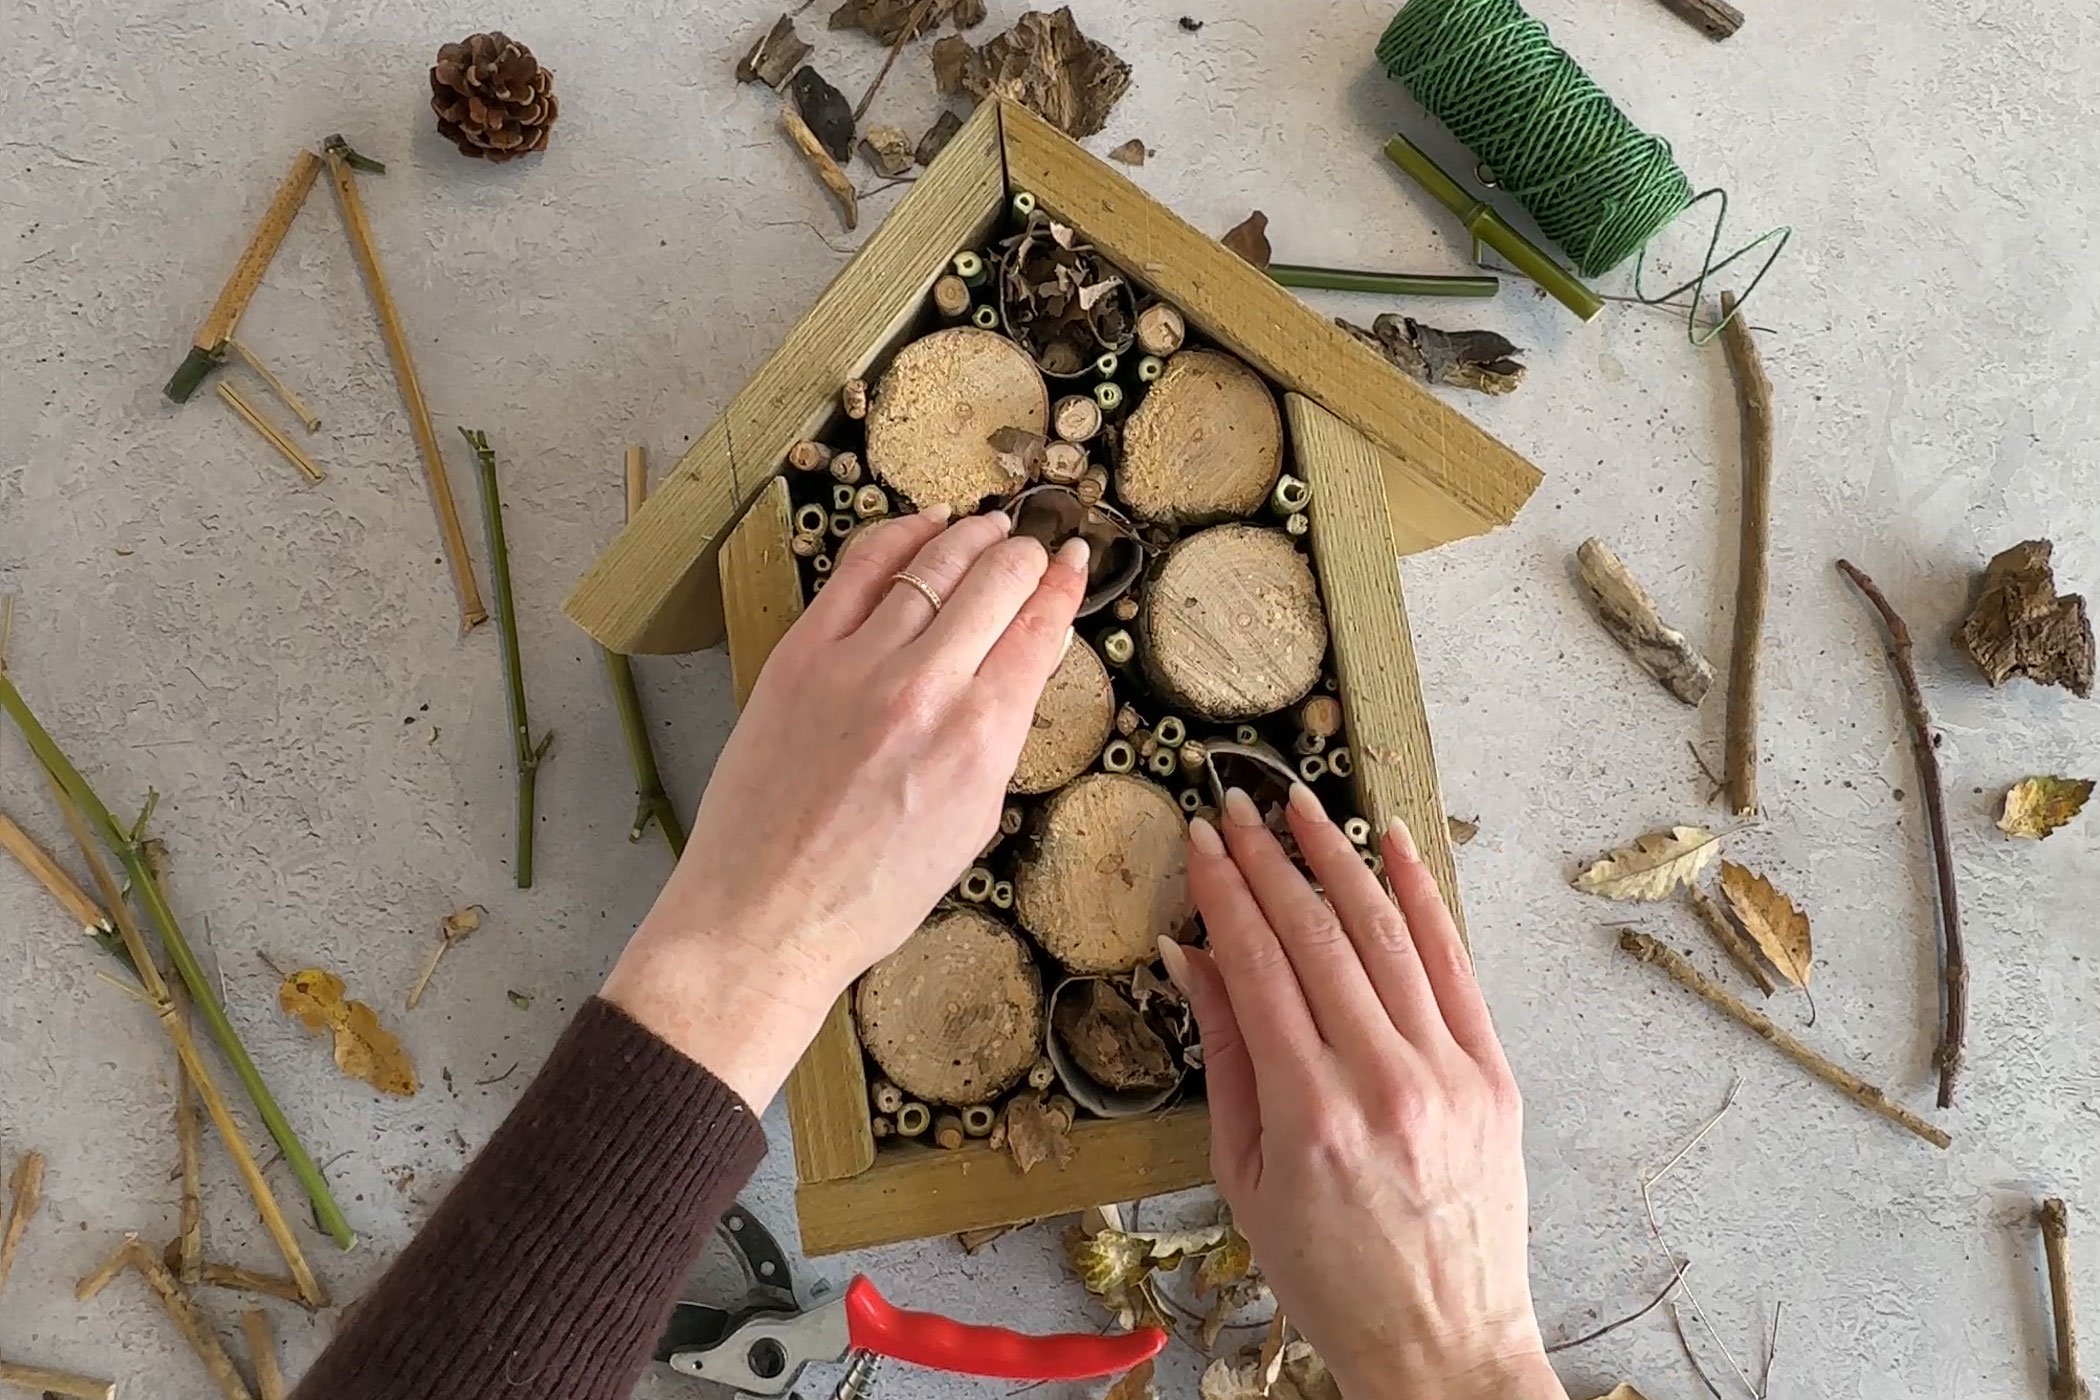 Step Three - Fill your bug hotel with any materials you can find